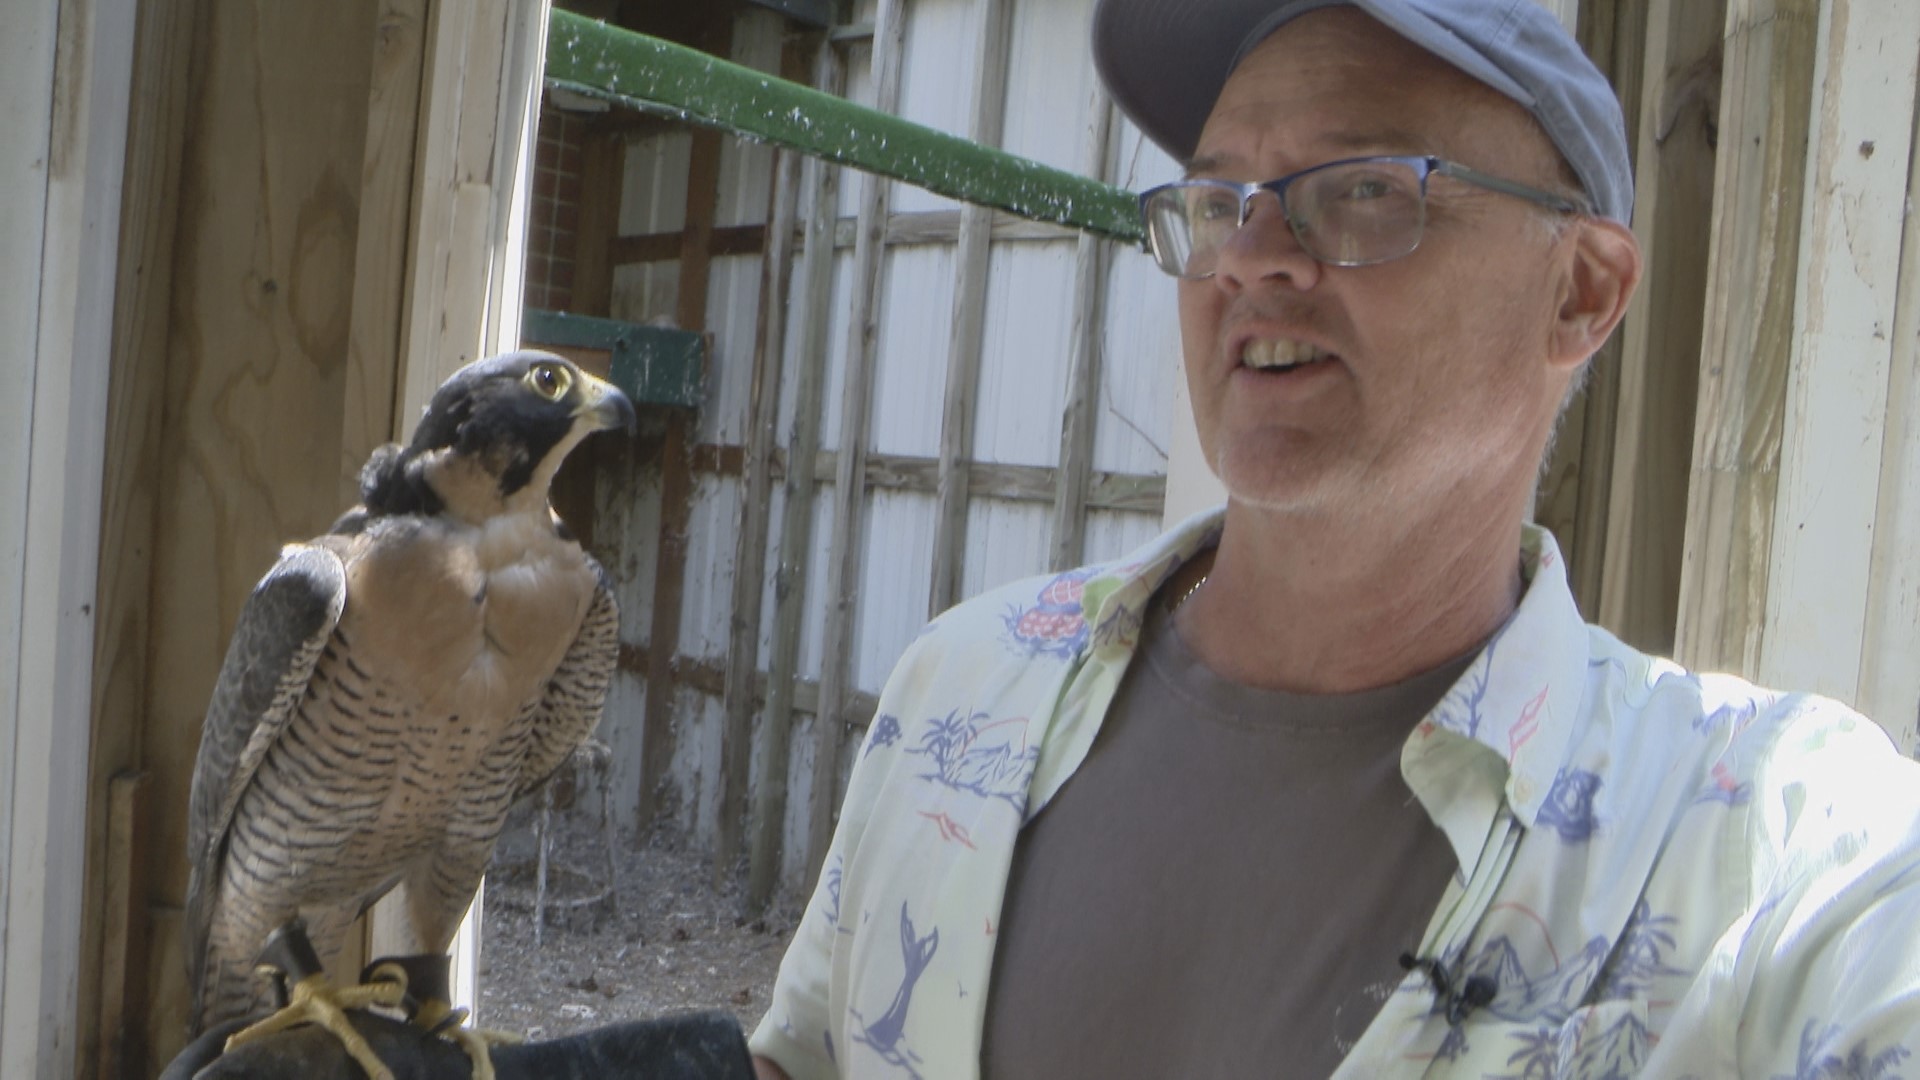 His legacy program, the "Raptor Propagation Lab" will also sunset with his retirement.